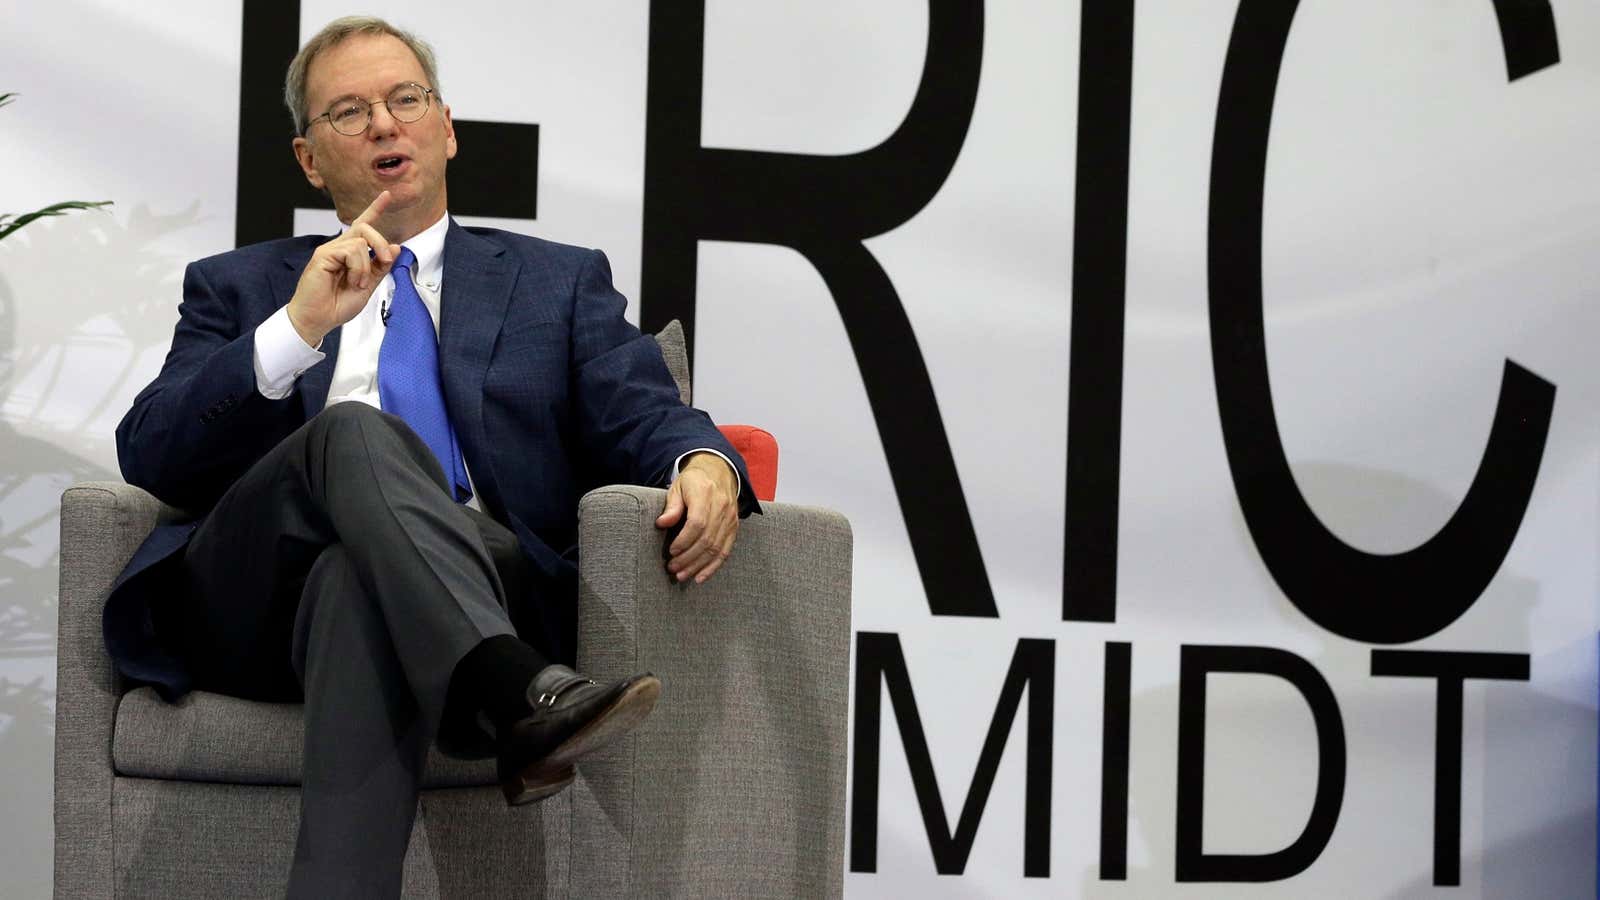 Eric Schmidt: The man, the legend, the Google executive chairman who can’t find new mobile companies to acquire.